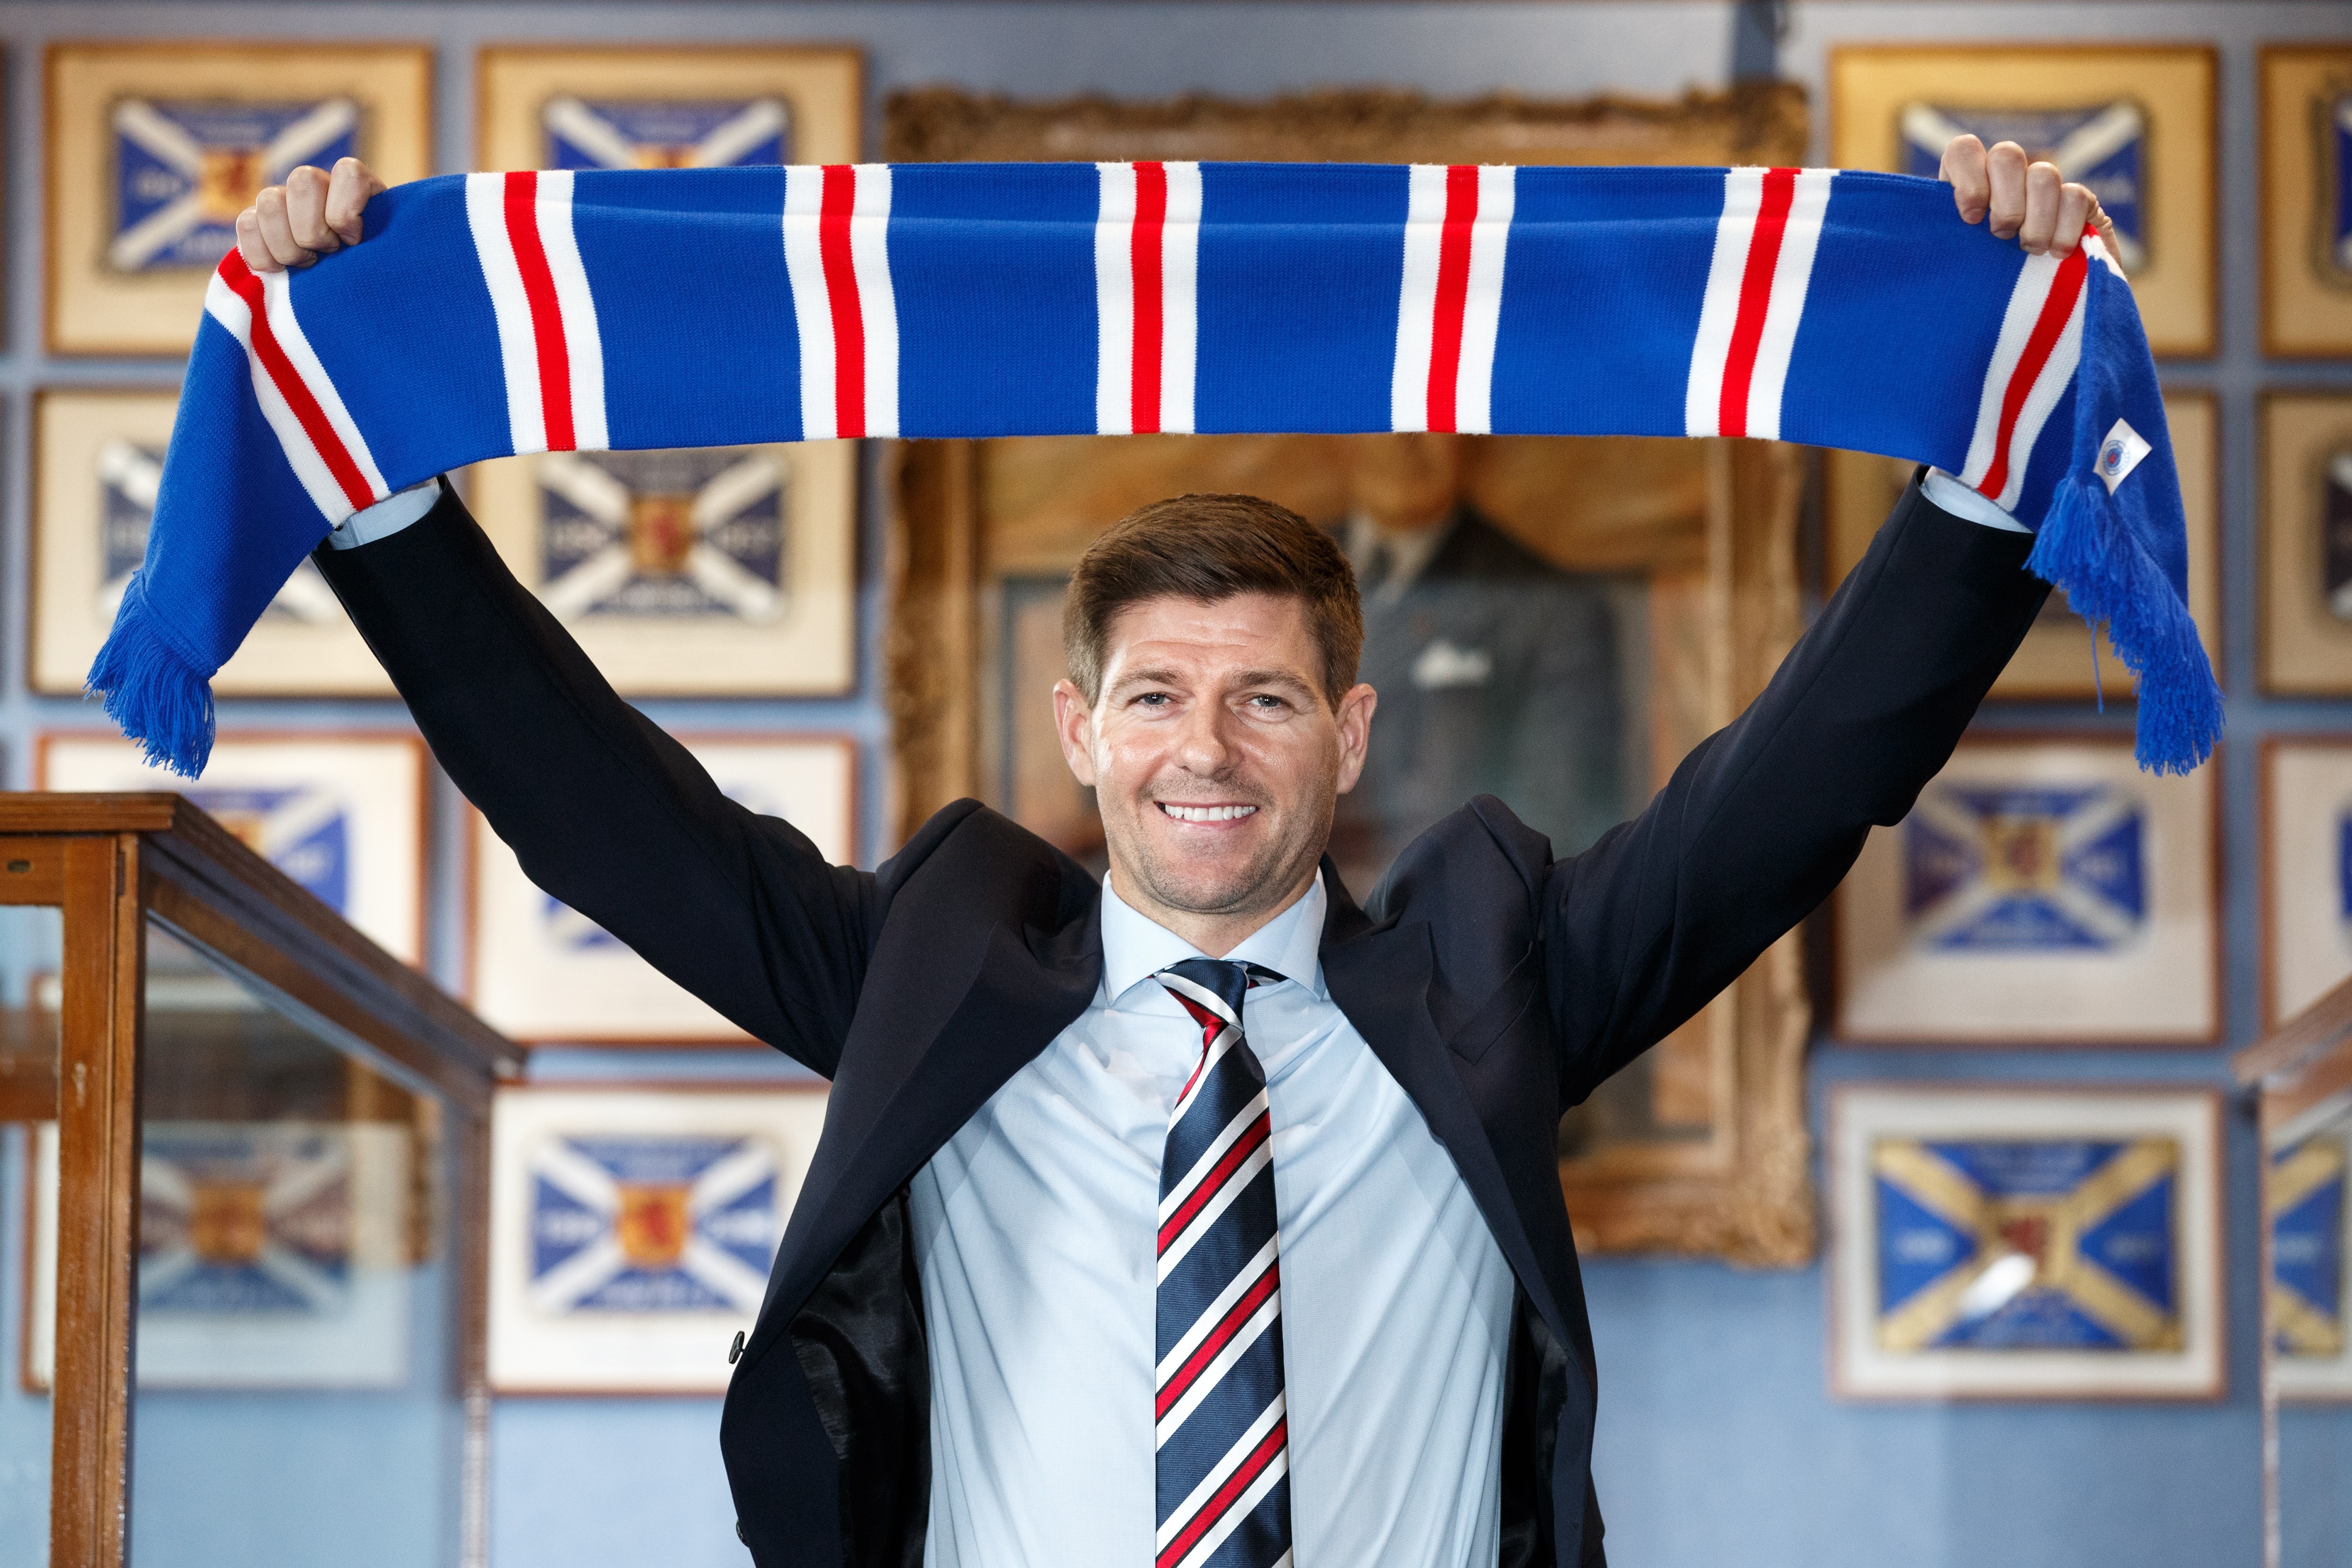 Steven Gerrard smiles as he is unveiled as the new manager of Rangers at Ibrox Stadium in Glasgow, Scotland. Photo: EPA